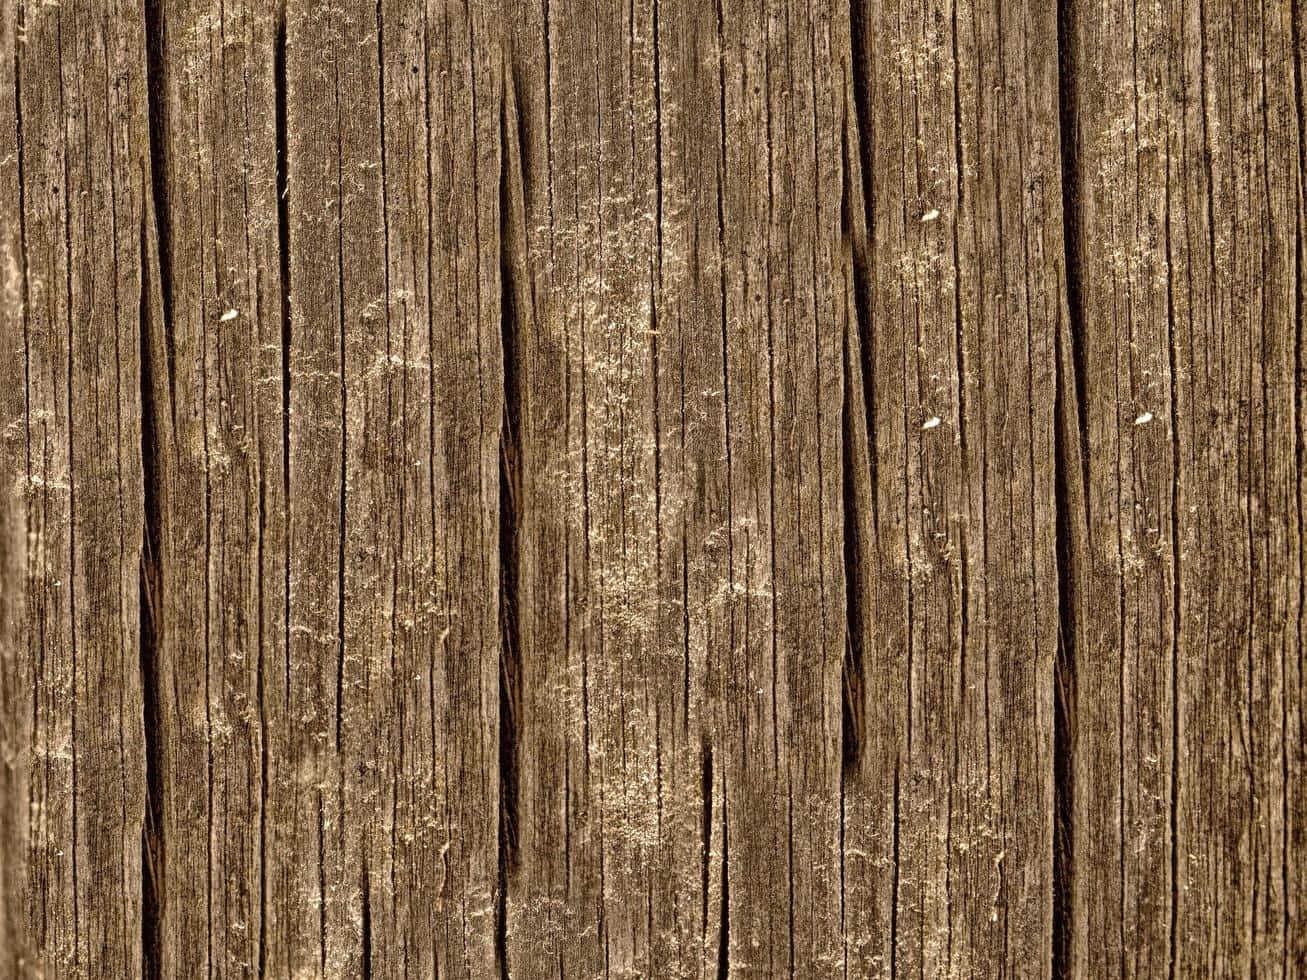 A Close Up Of A Wooden Plank Wallpaper